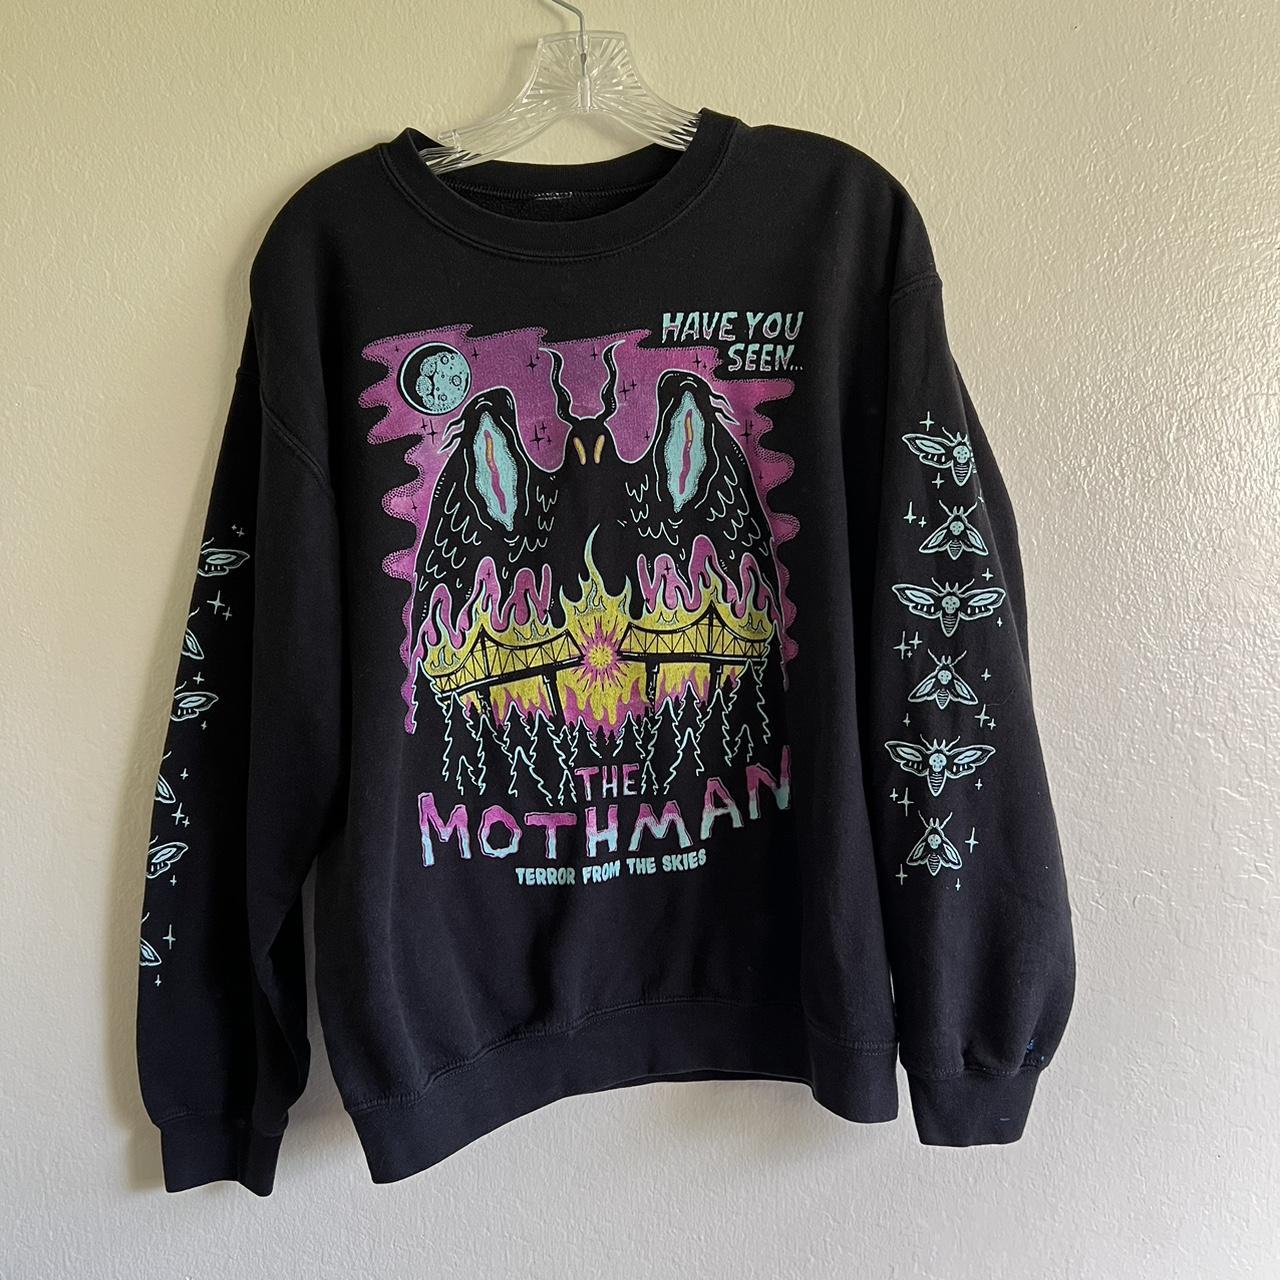 Have you seen the moth man??? Well now you have. On... - Depop